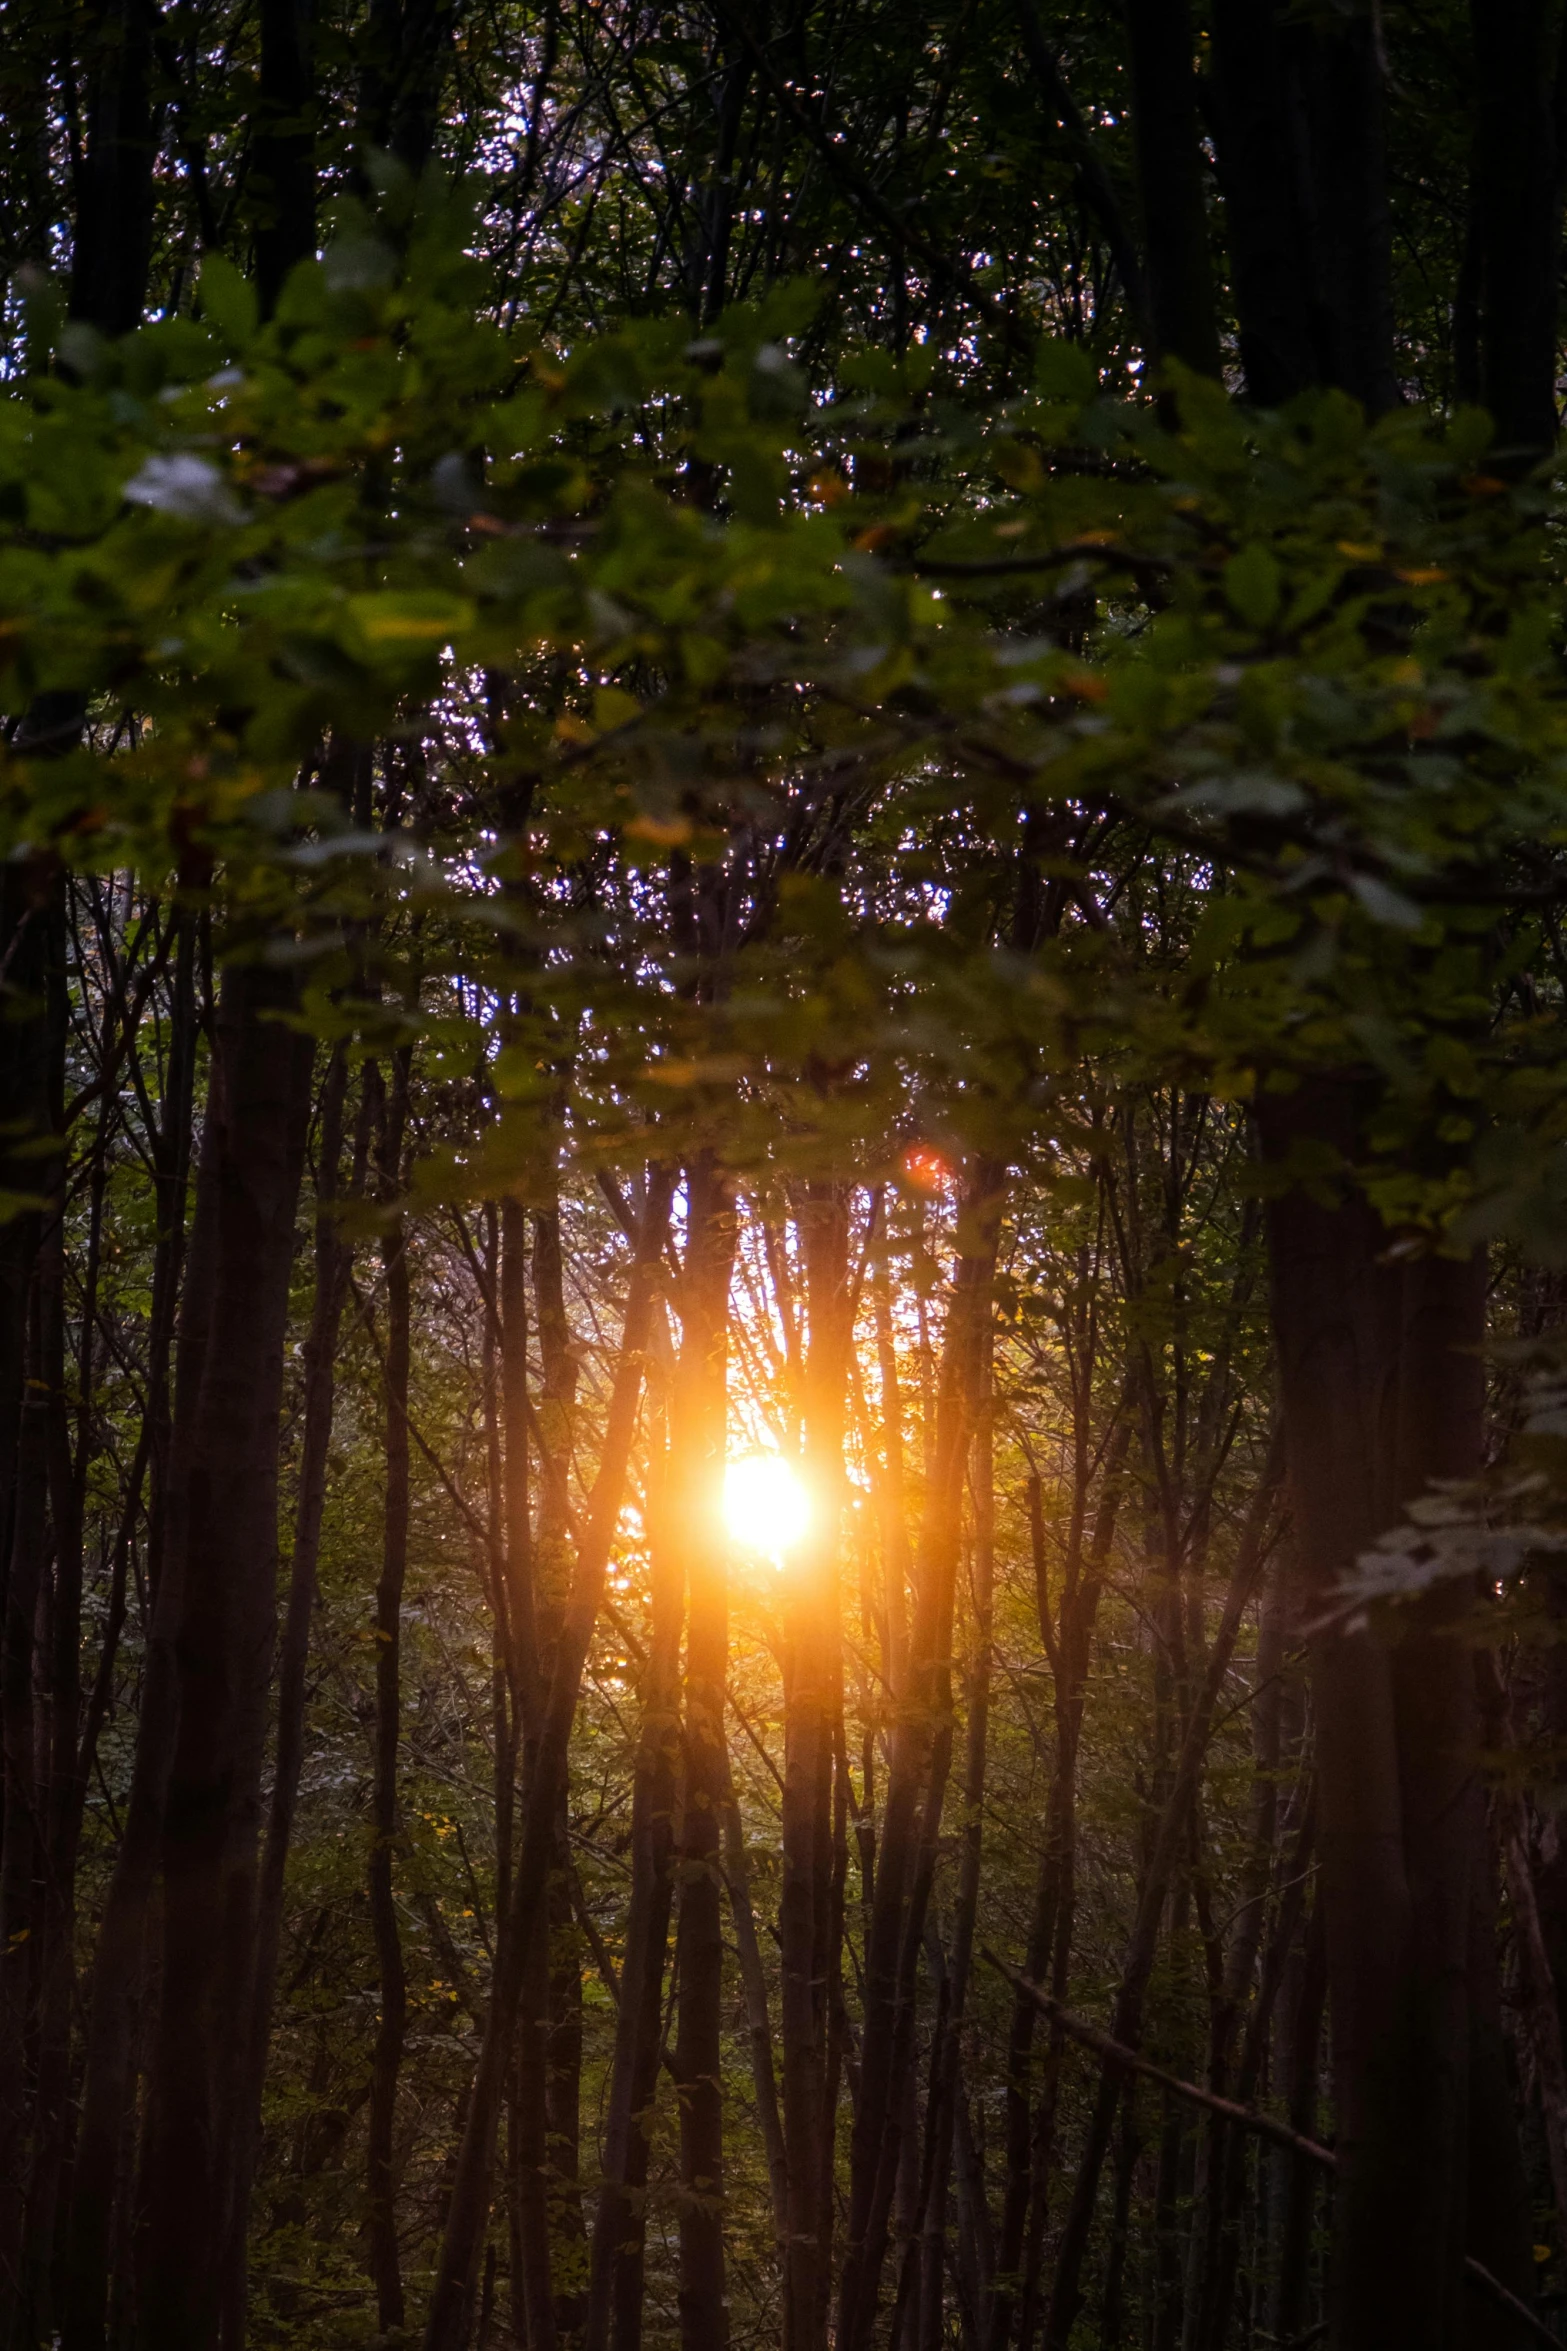 the sun is setting in the forest on this rainy day